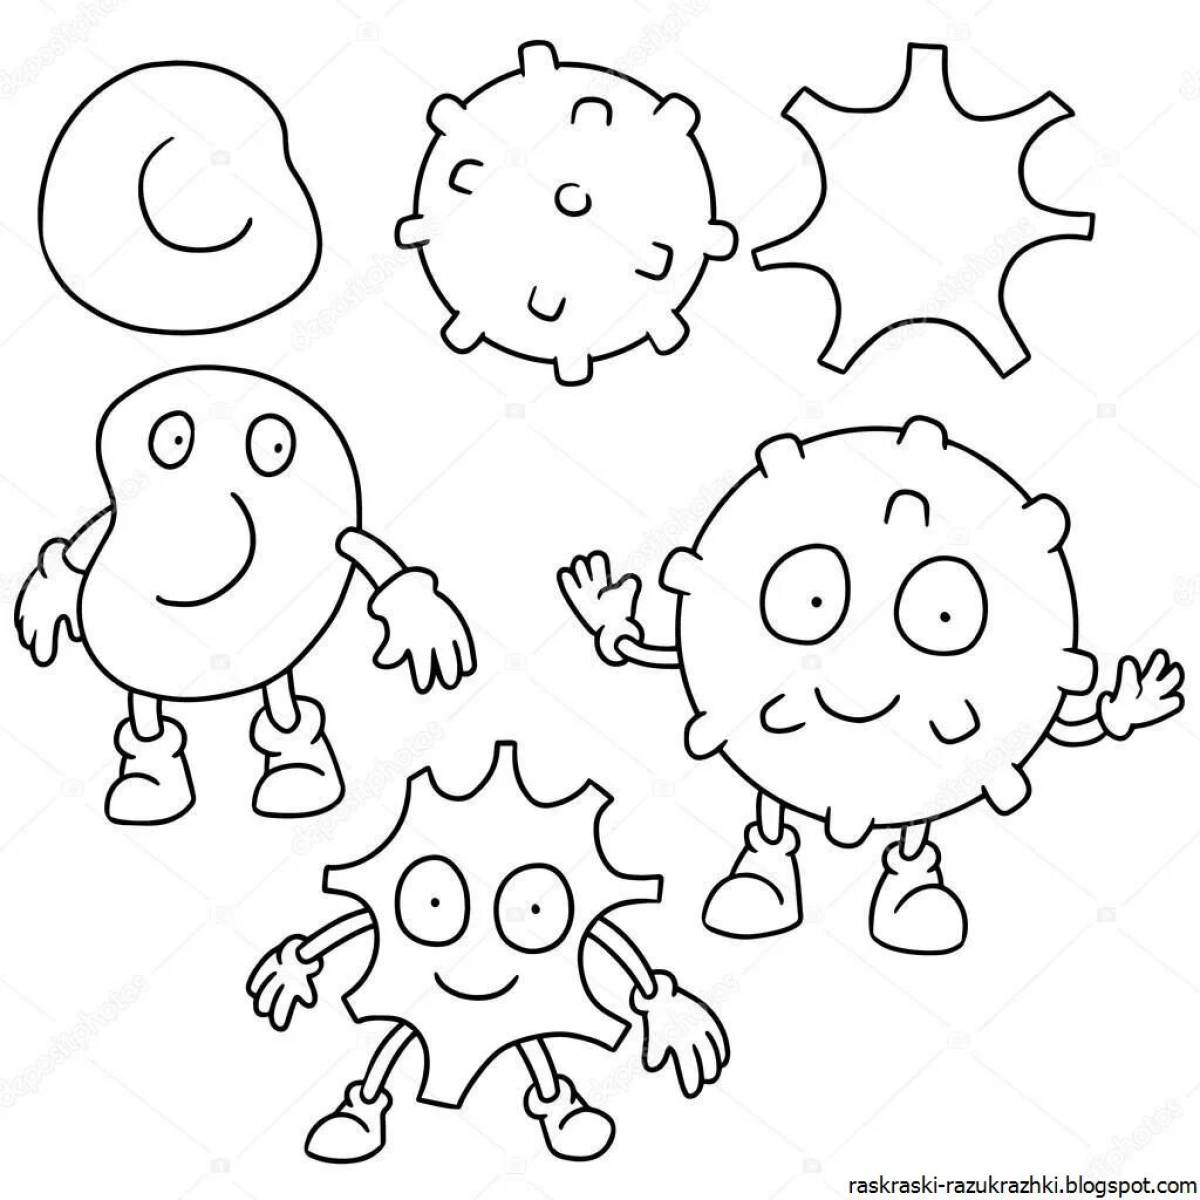 Viruses and germs for children #4